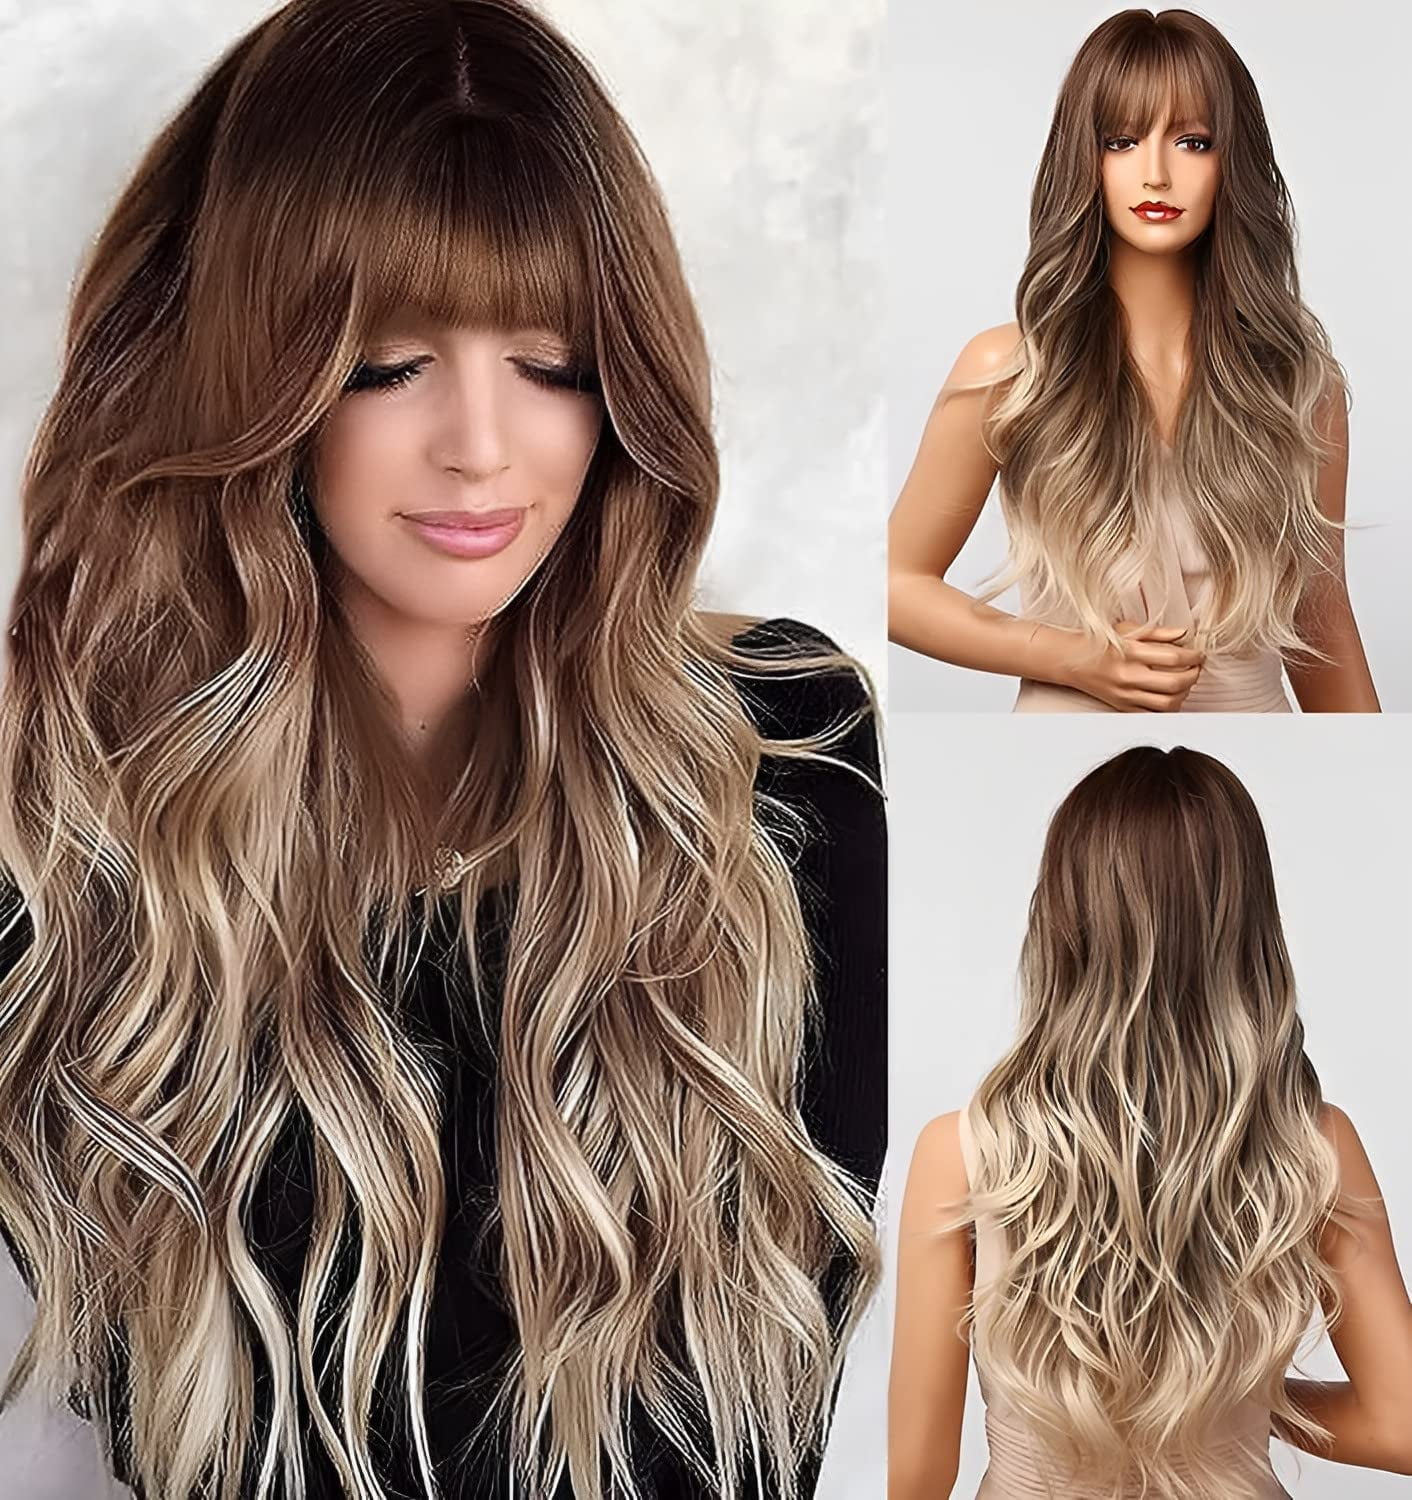 Women's Wigs Long Wavy Ombre Brown to Blonde Wigs with Bangs Ash Blonde Hair  Wigs with Bangs Synthetic Wigs Cosplay Hair Wigs for Women 